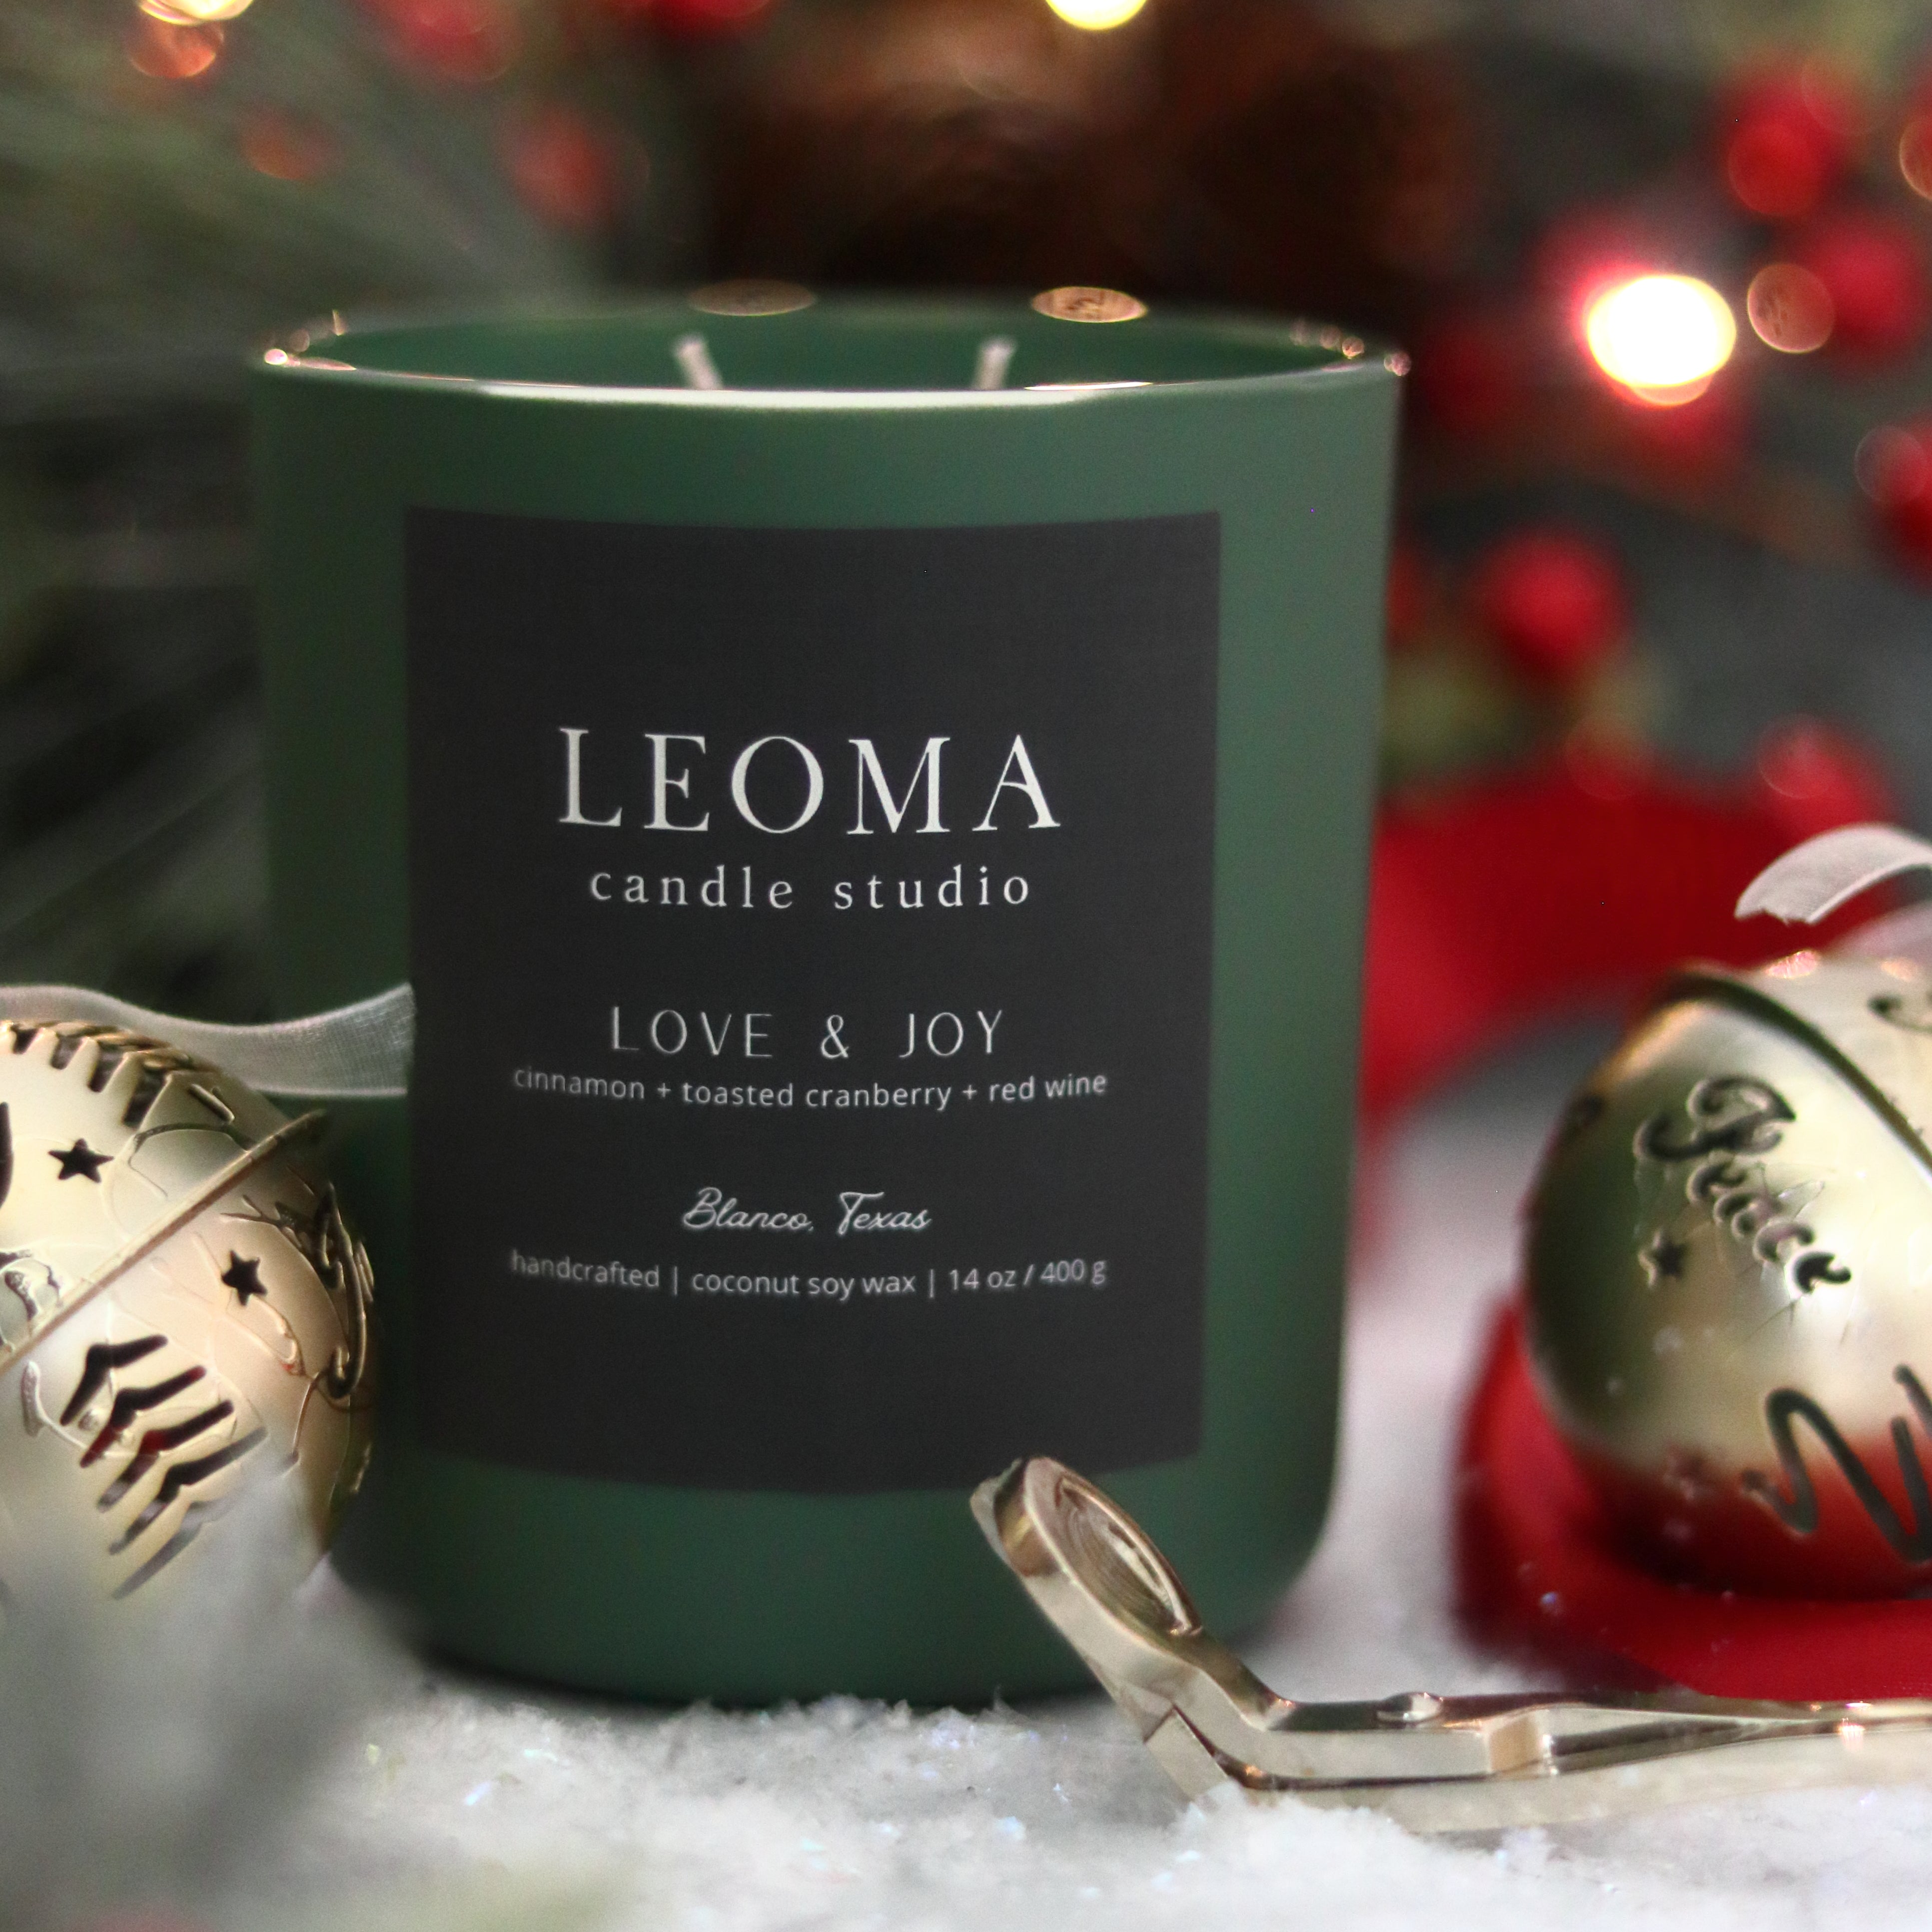 Handcrafted eco-friendly scented Christmas candle. Natural coconut & soy wax, toxin-free, 100% cotton wicks. Olive vessel. Love & Joy scent.